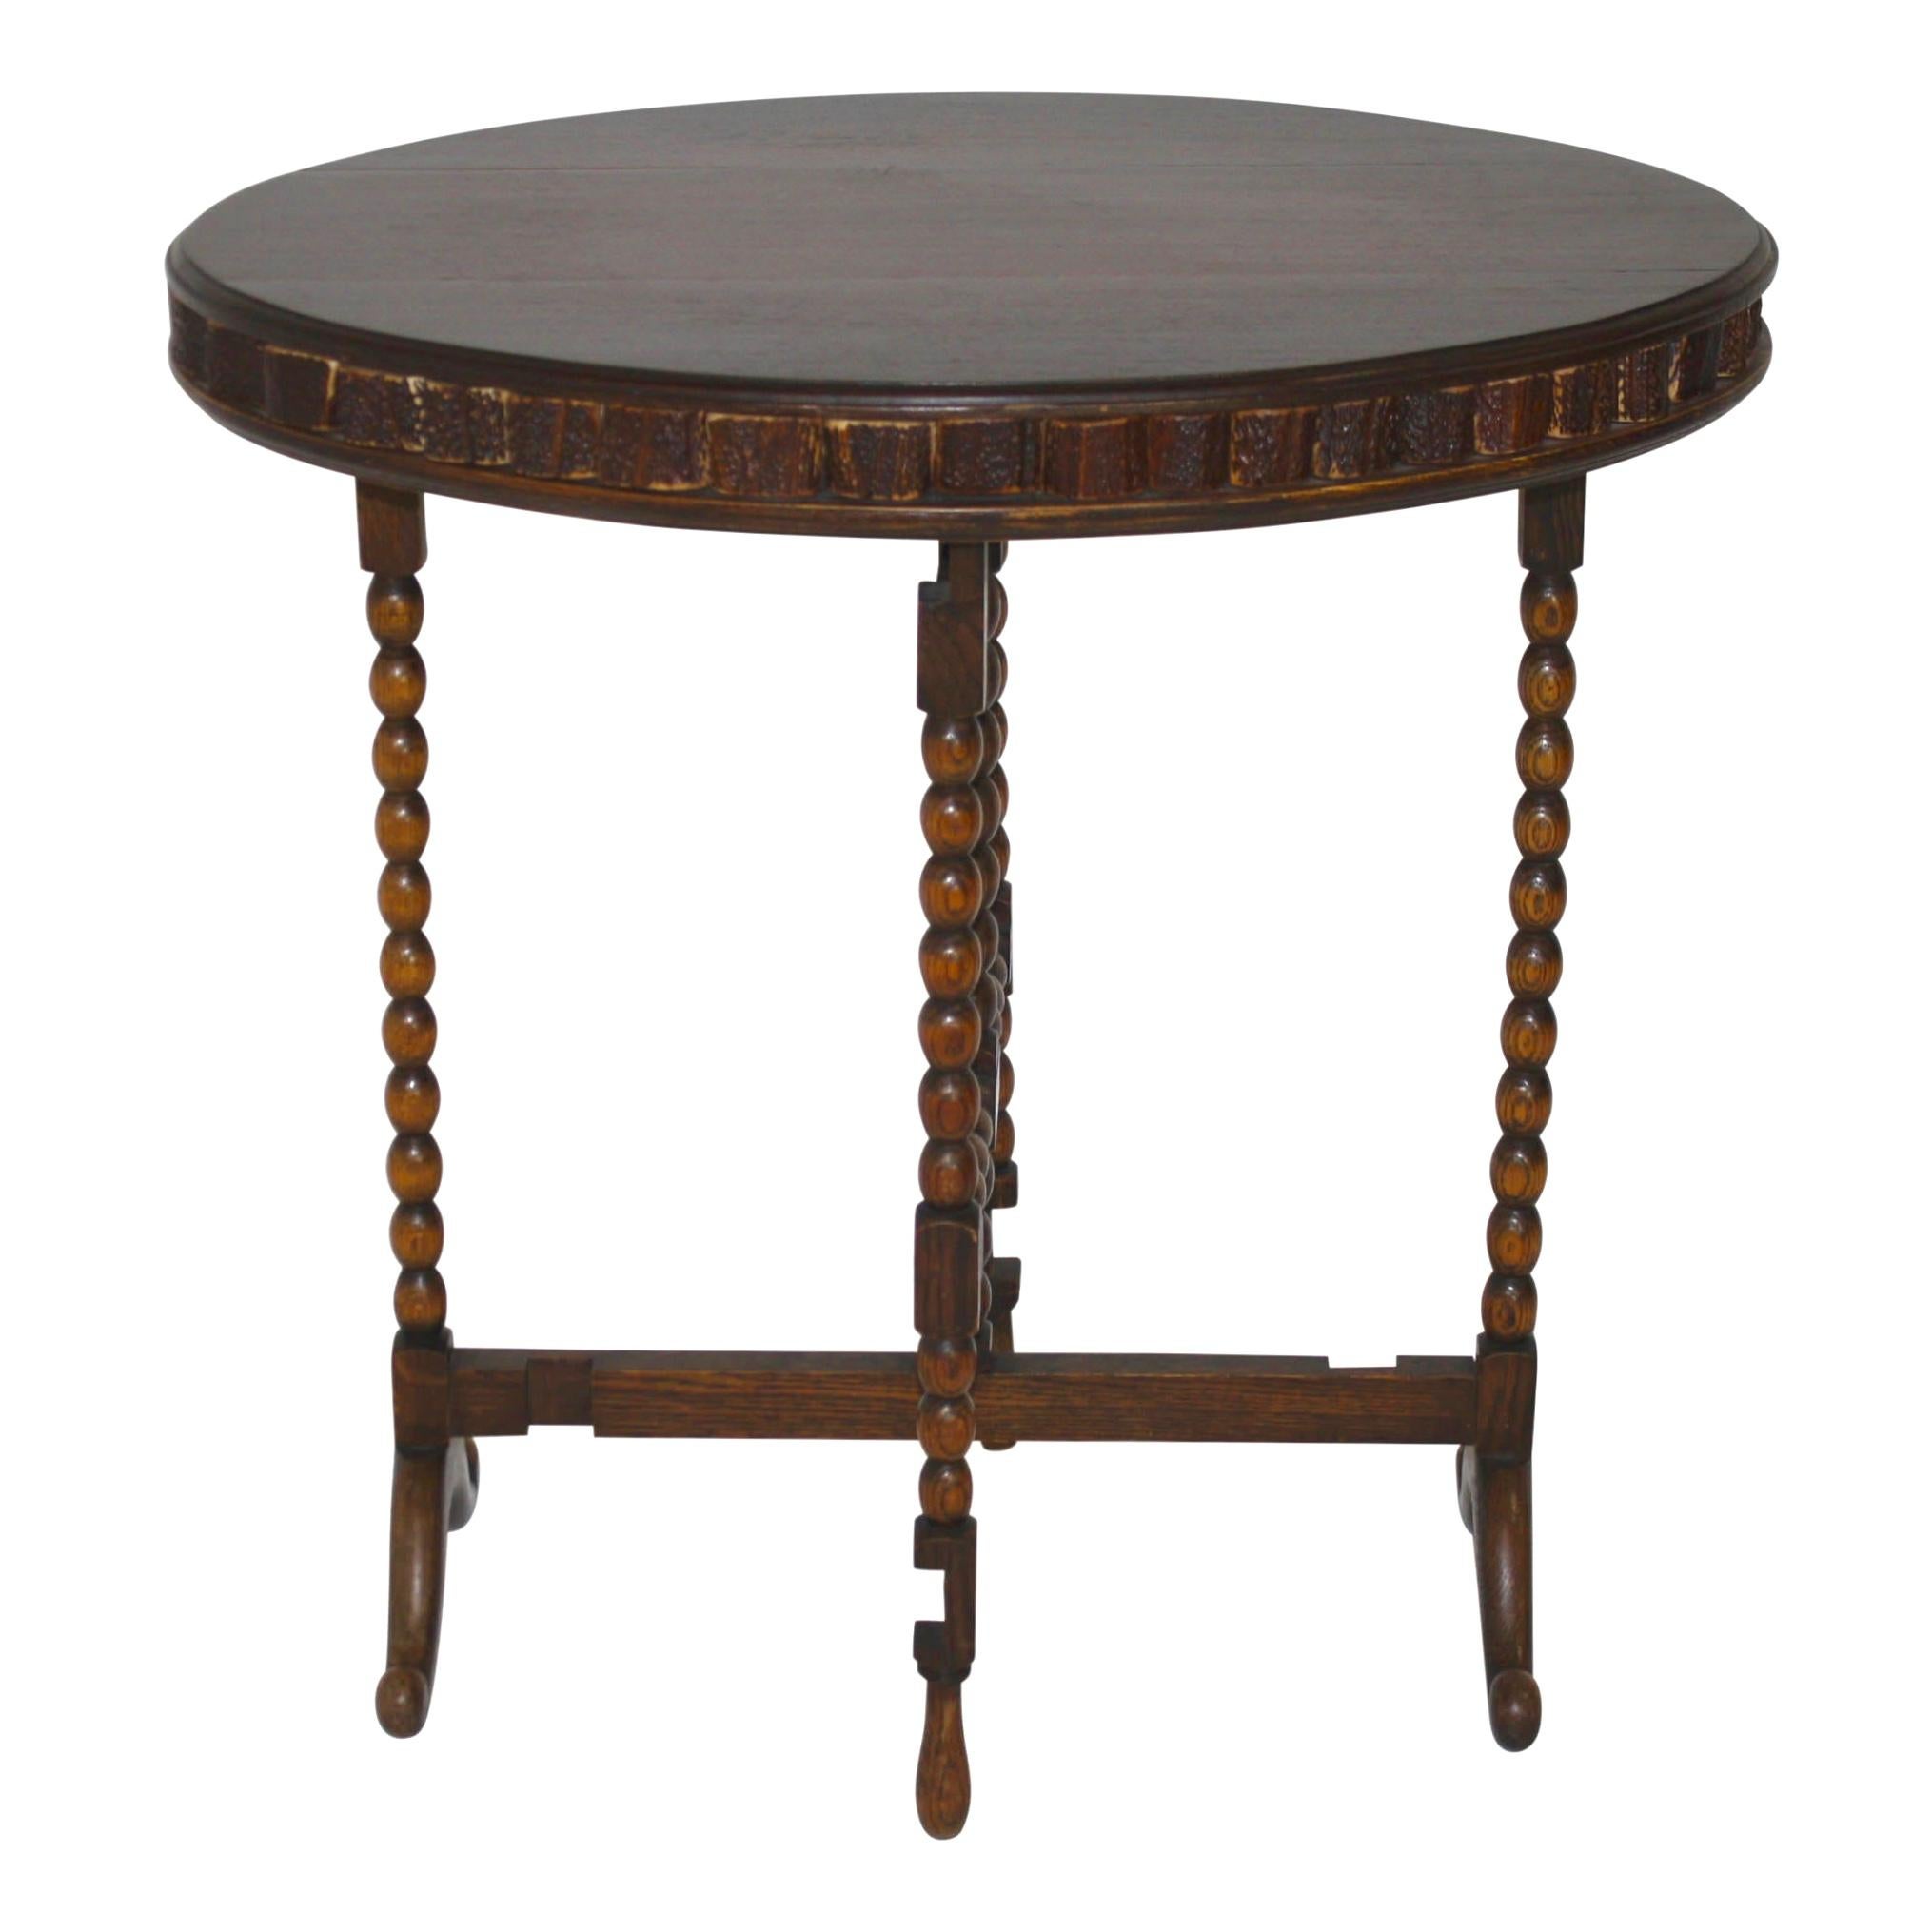 Crafted by designer Brad Ham, this versatile table is comprised of a new, oak tabletop and legs from an antique, gate-leg table. The top is trimmed with segments of stag antlers from Europe. The legs are beaded with rotating, top stretchers, which